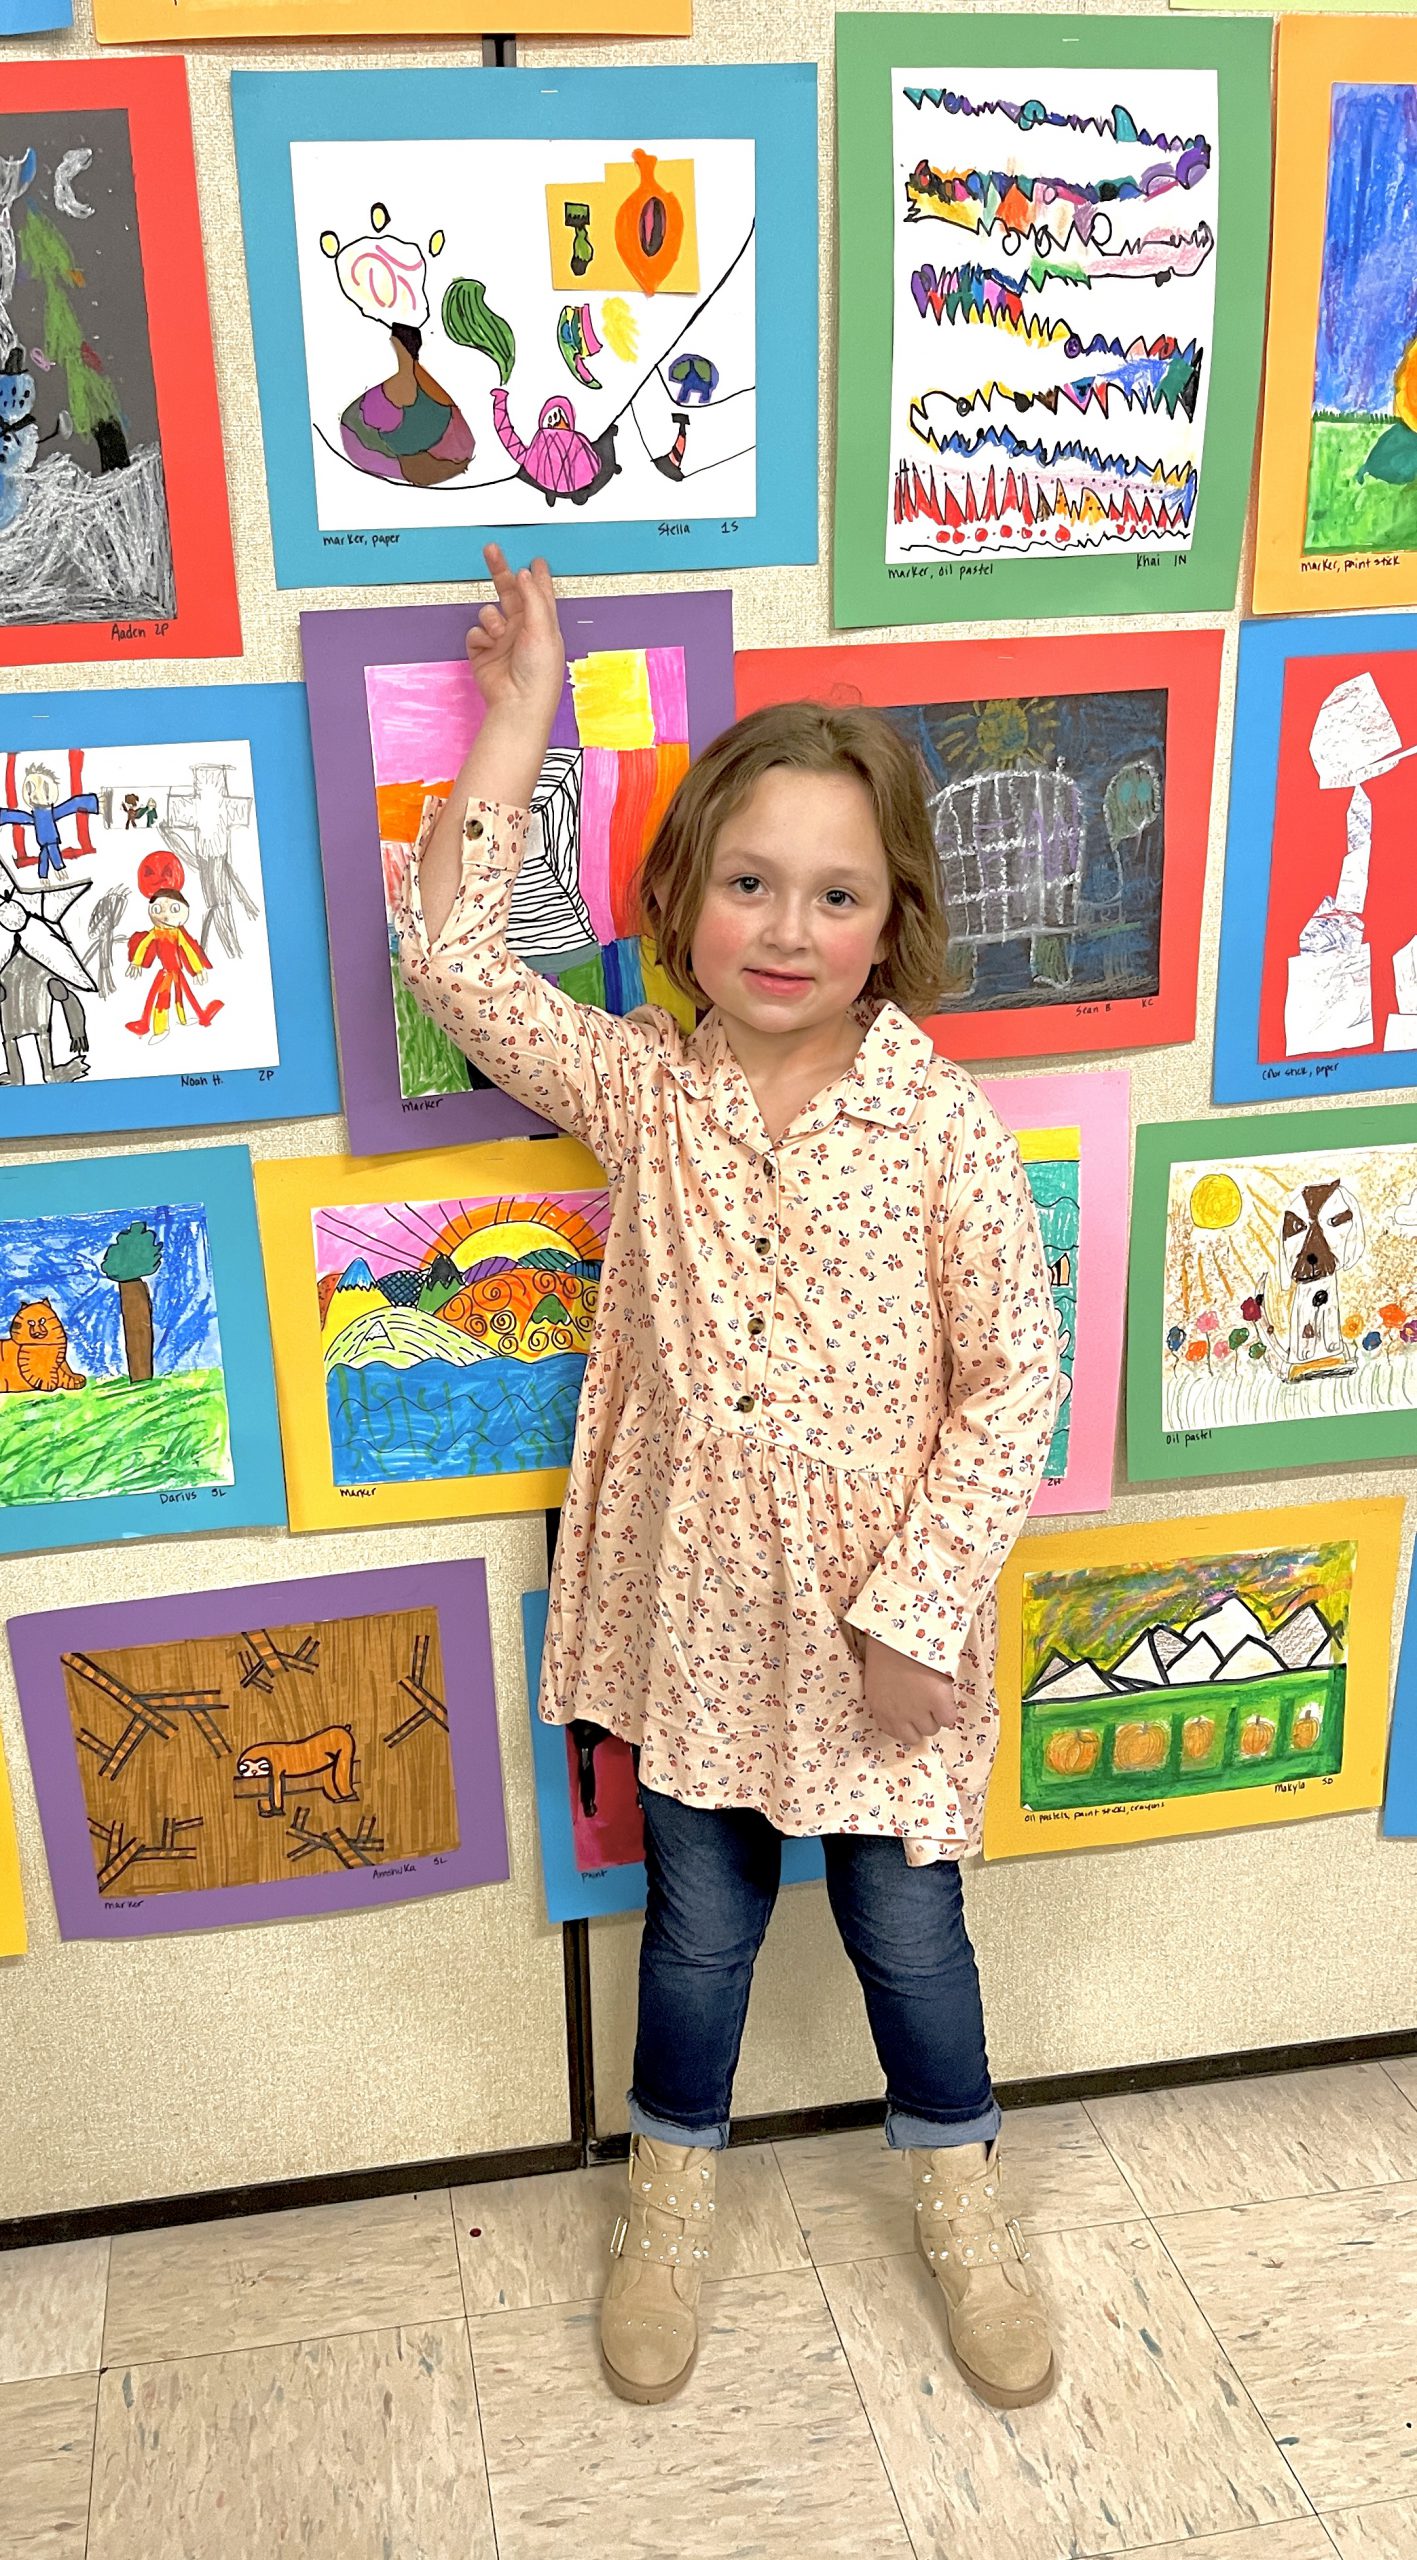 A girl wearing jeans and a light colored printed  shirt stands in front of a wall of artwork points to her work.